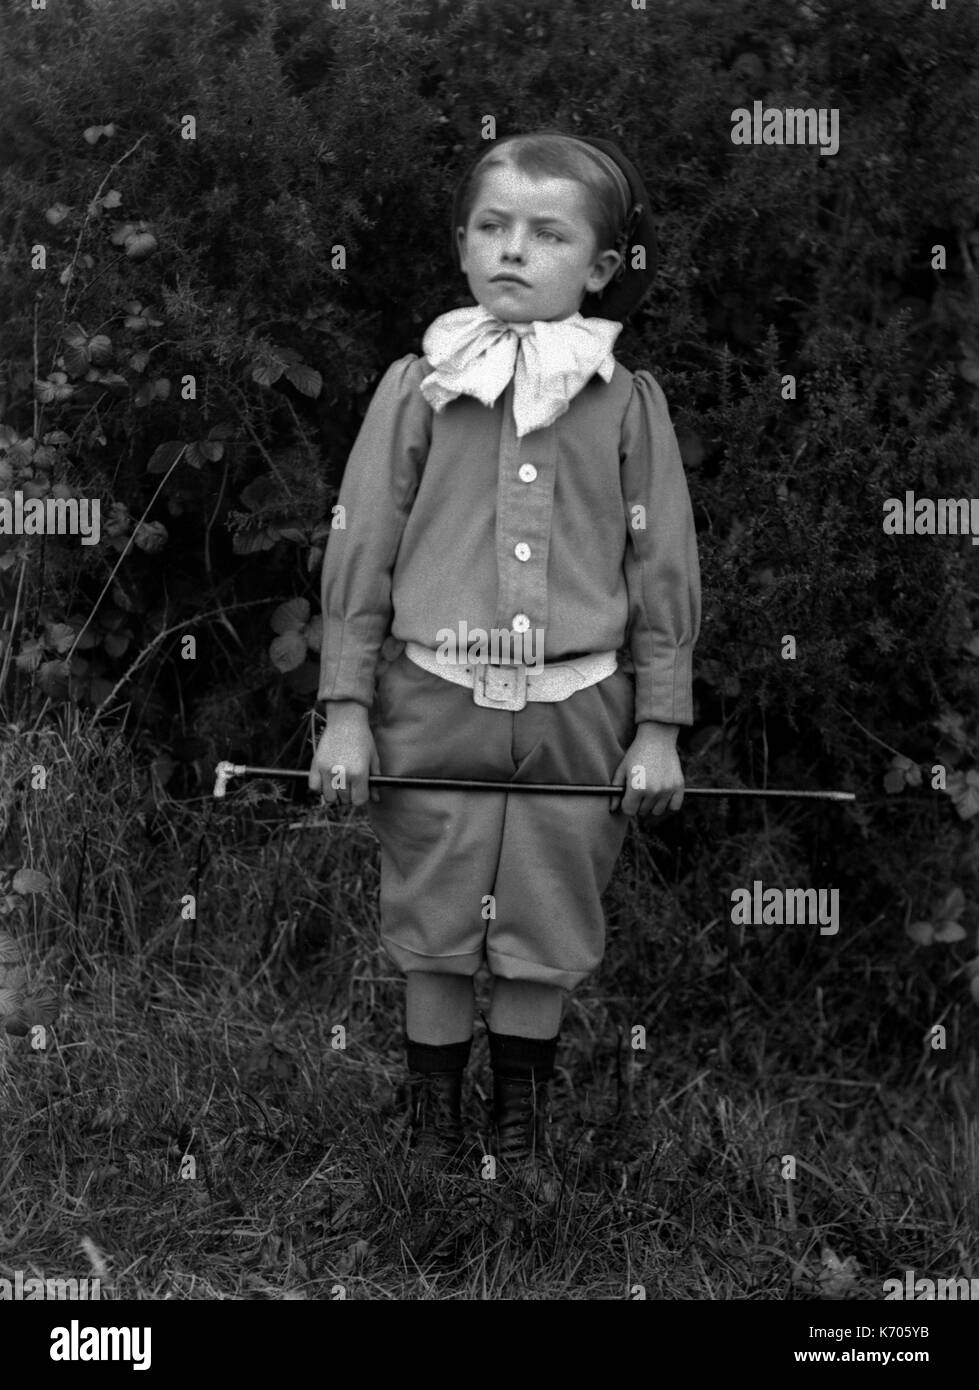 AJAXNETPHOTO. 1891-1910 (APPROX). FRANCE. - PORTRAIT OF A YOUNG BOY IN A UNIFORM WITH A BOW WEARING A BERET AND HOLDING A RIDING CROP. PHOTOGRAPHER:UNKNOWN © DIGITAL IMAGE COPYRIGHT AJAX VINTAGE PICTURE LIBRARY SOURCE: AJAX VINTAGE PICTURE LIBRARY COLLECTION REF:AVL FRA 1890 B29X1226 Stock Photo